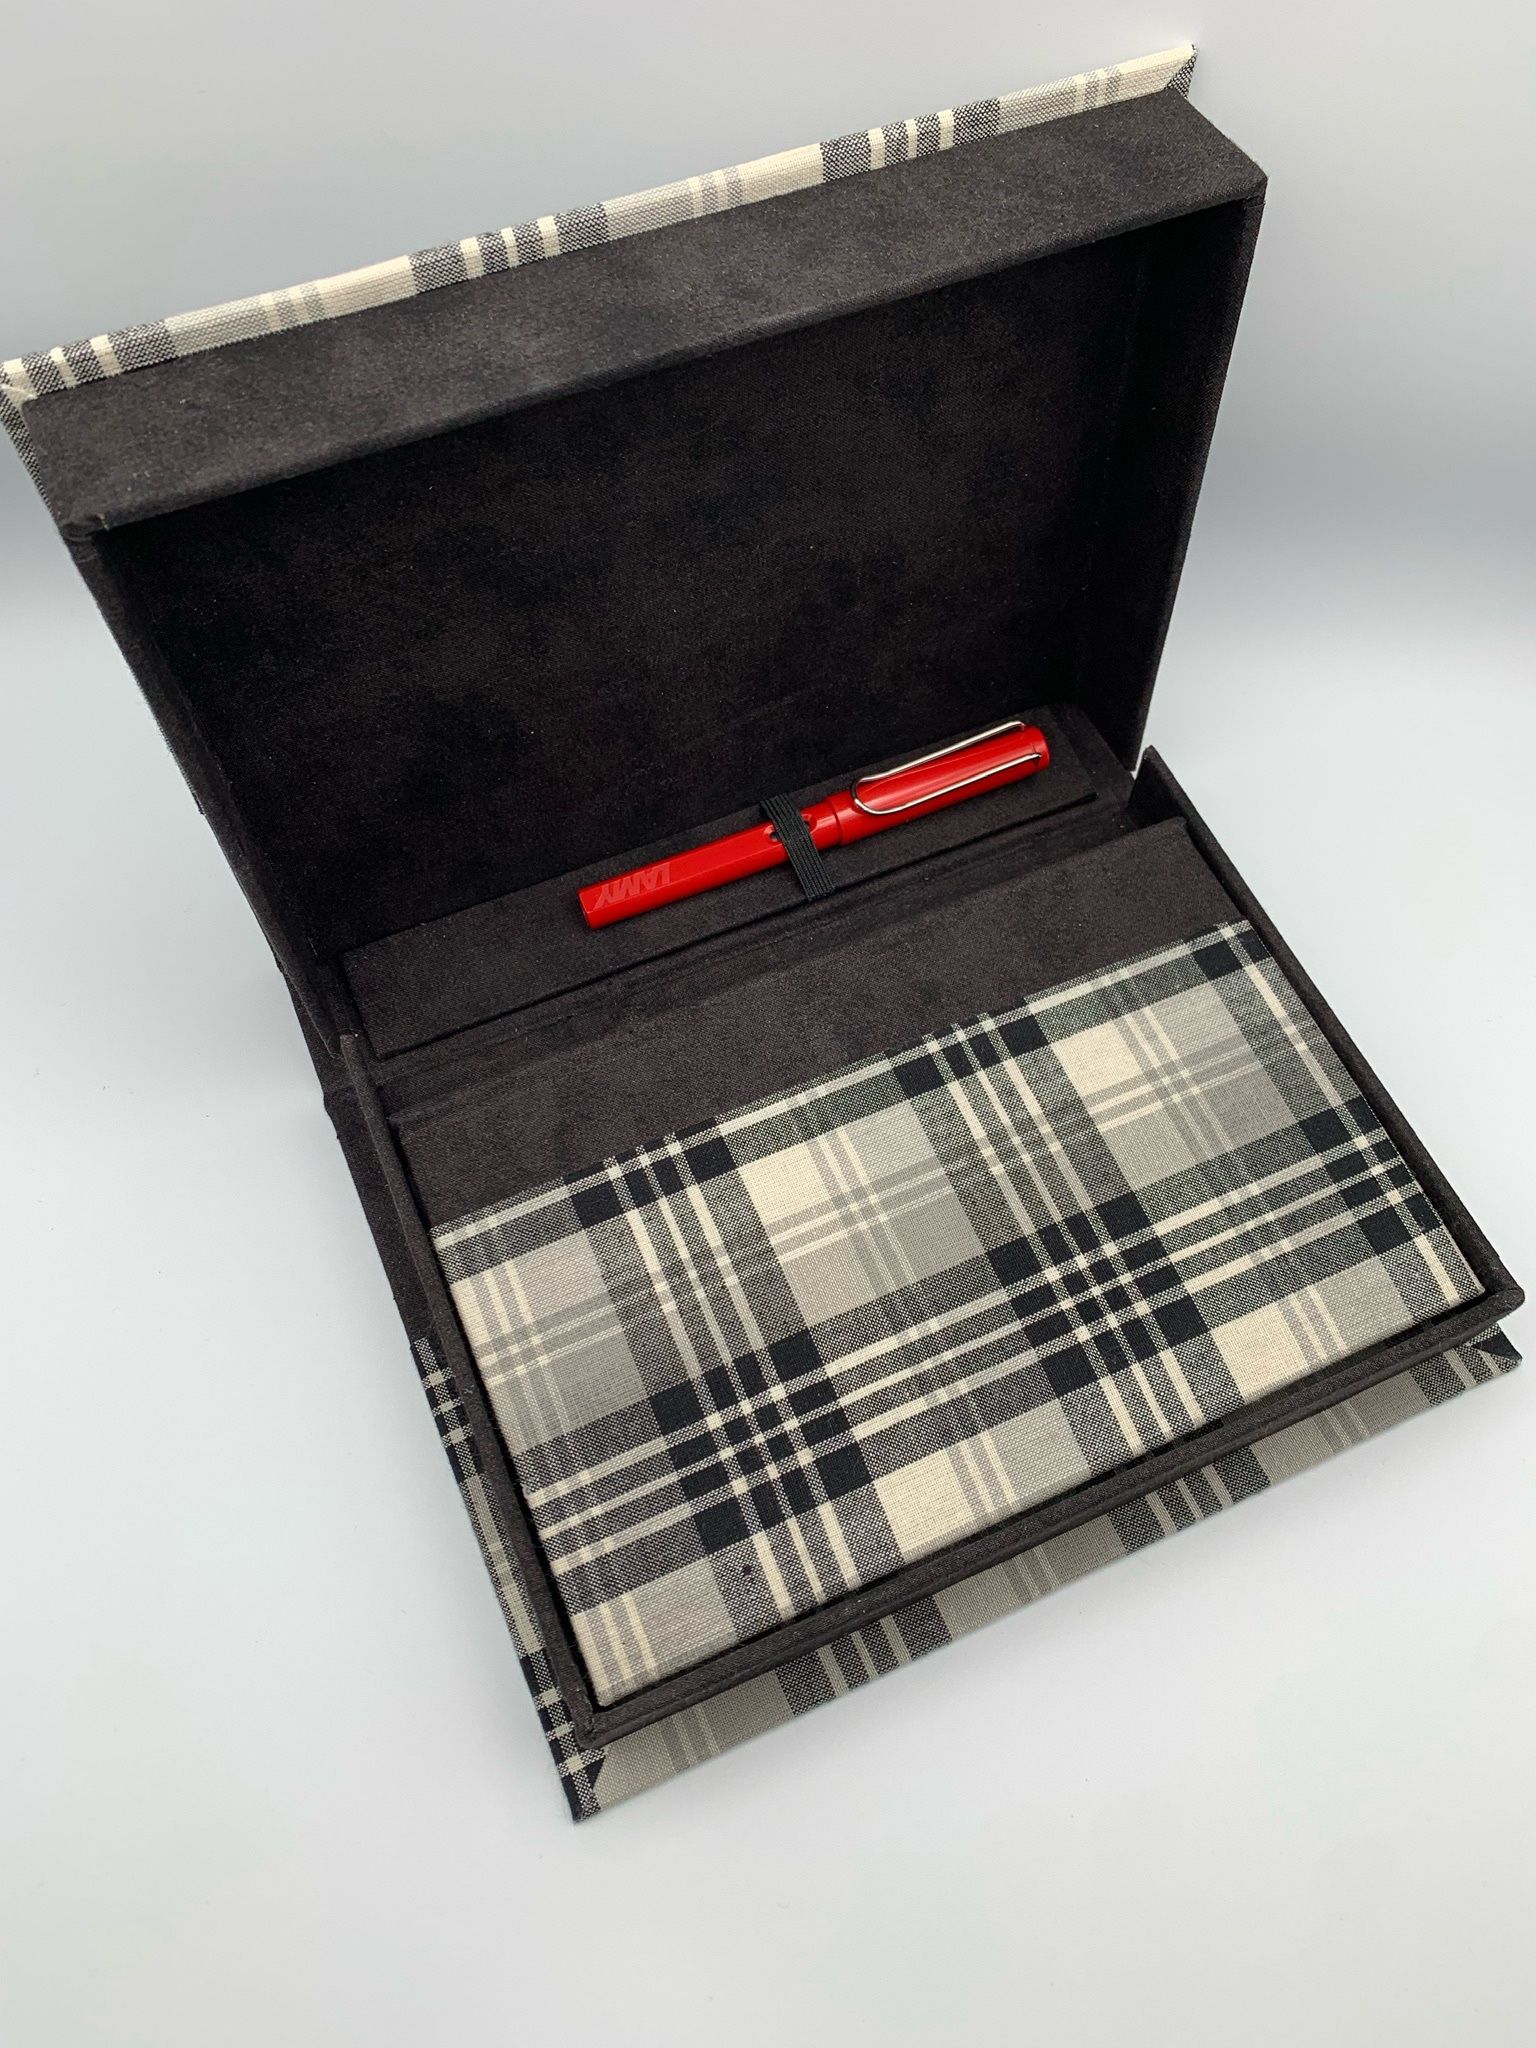 Handmade Notebook In Clamshell Box Finished In Black And White Checked Material, Including Red Lamy Fountain Pen And 5 Cartridges